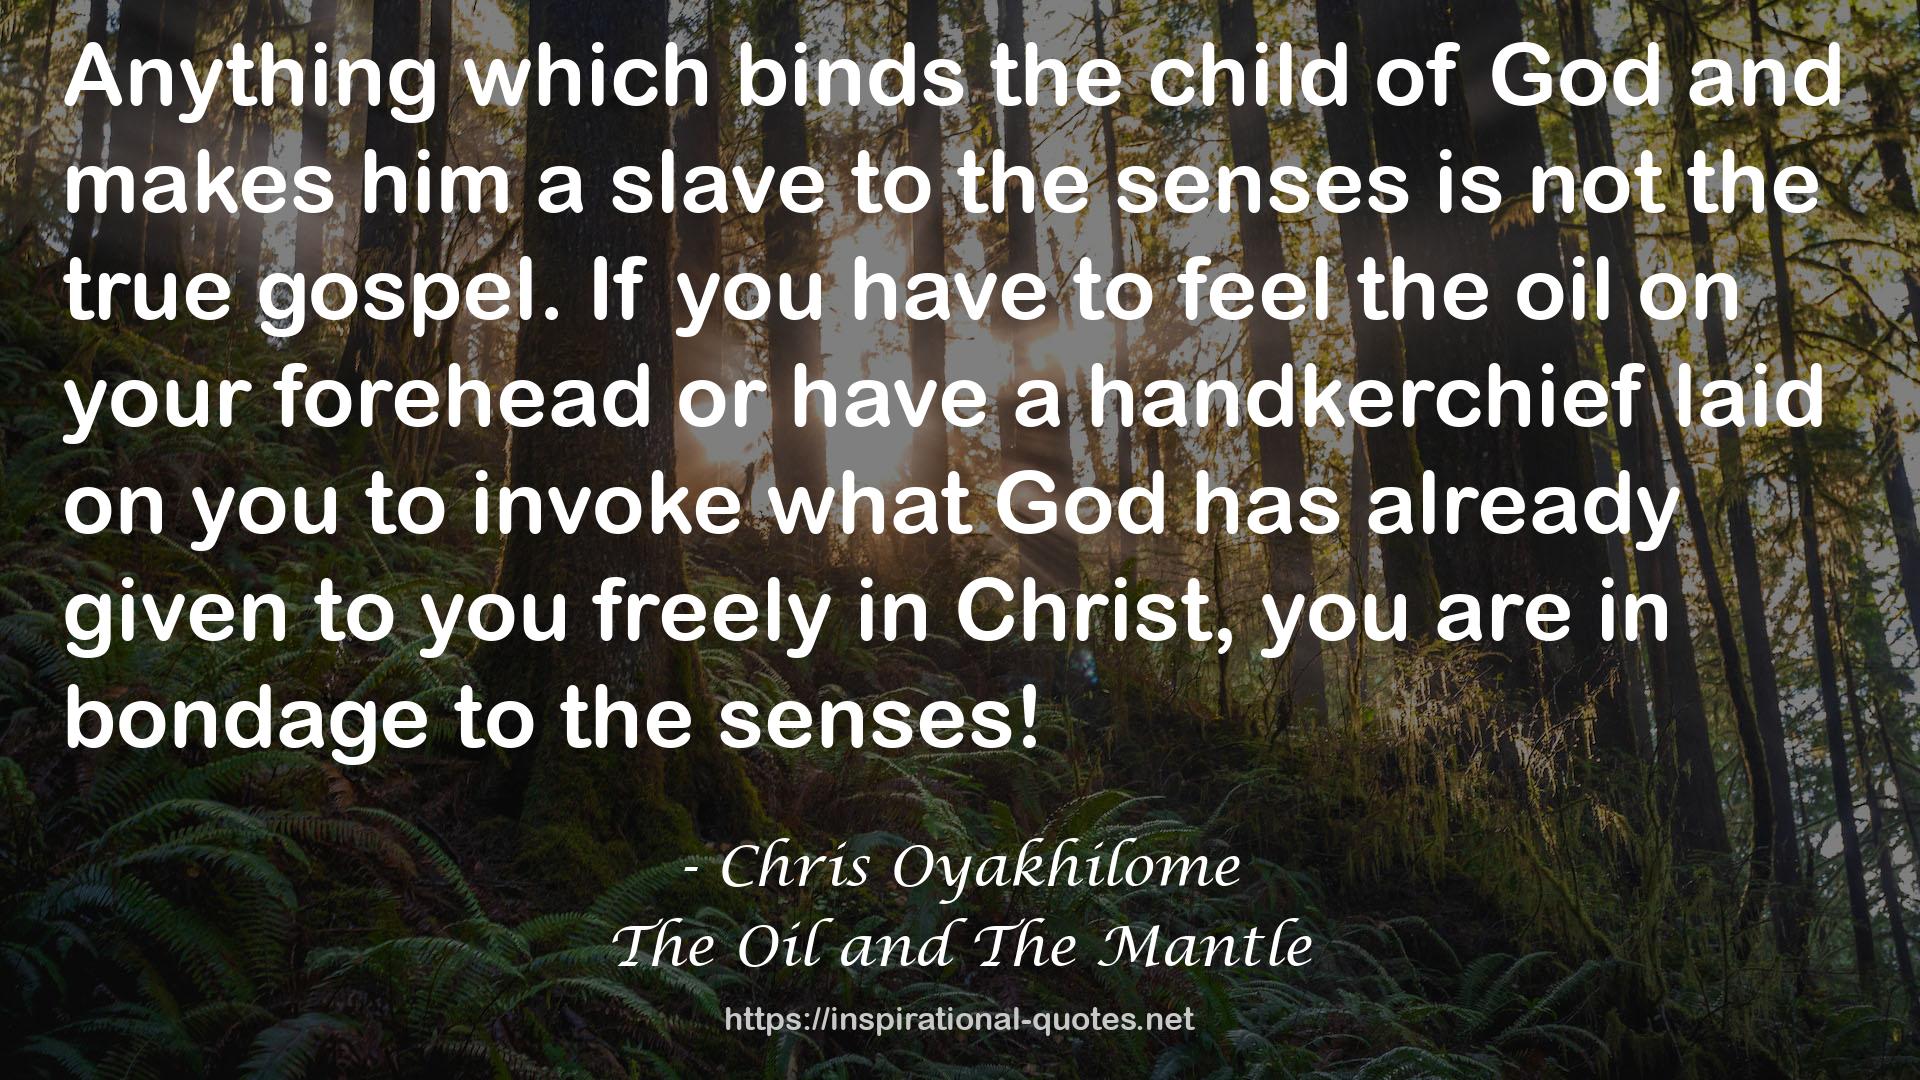 The Oil and The Mantle QUOTES